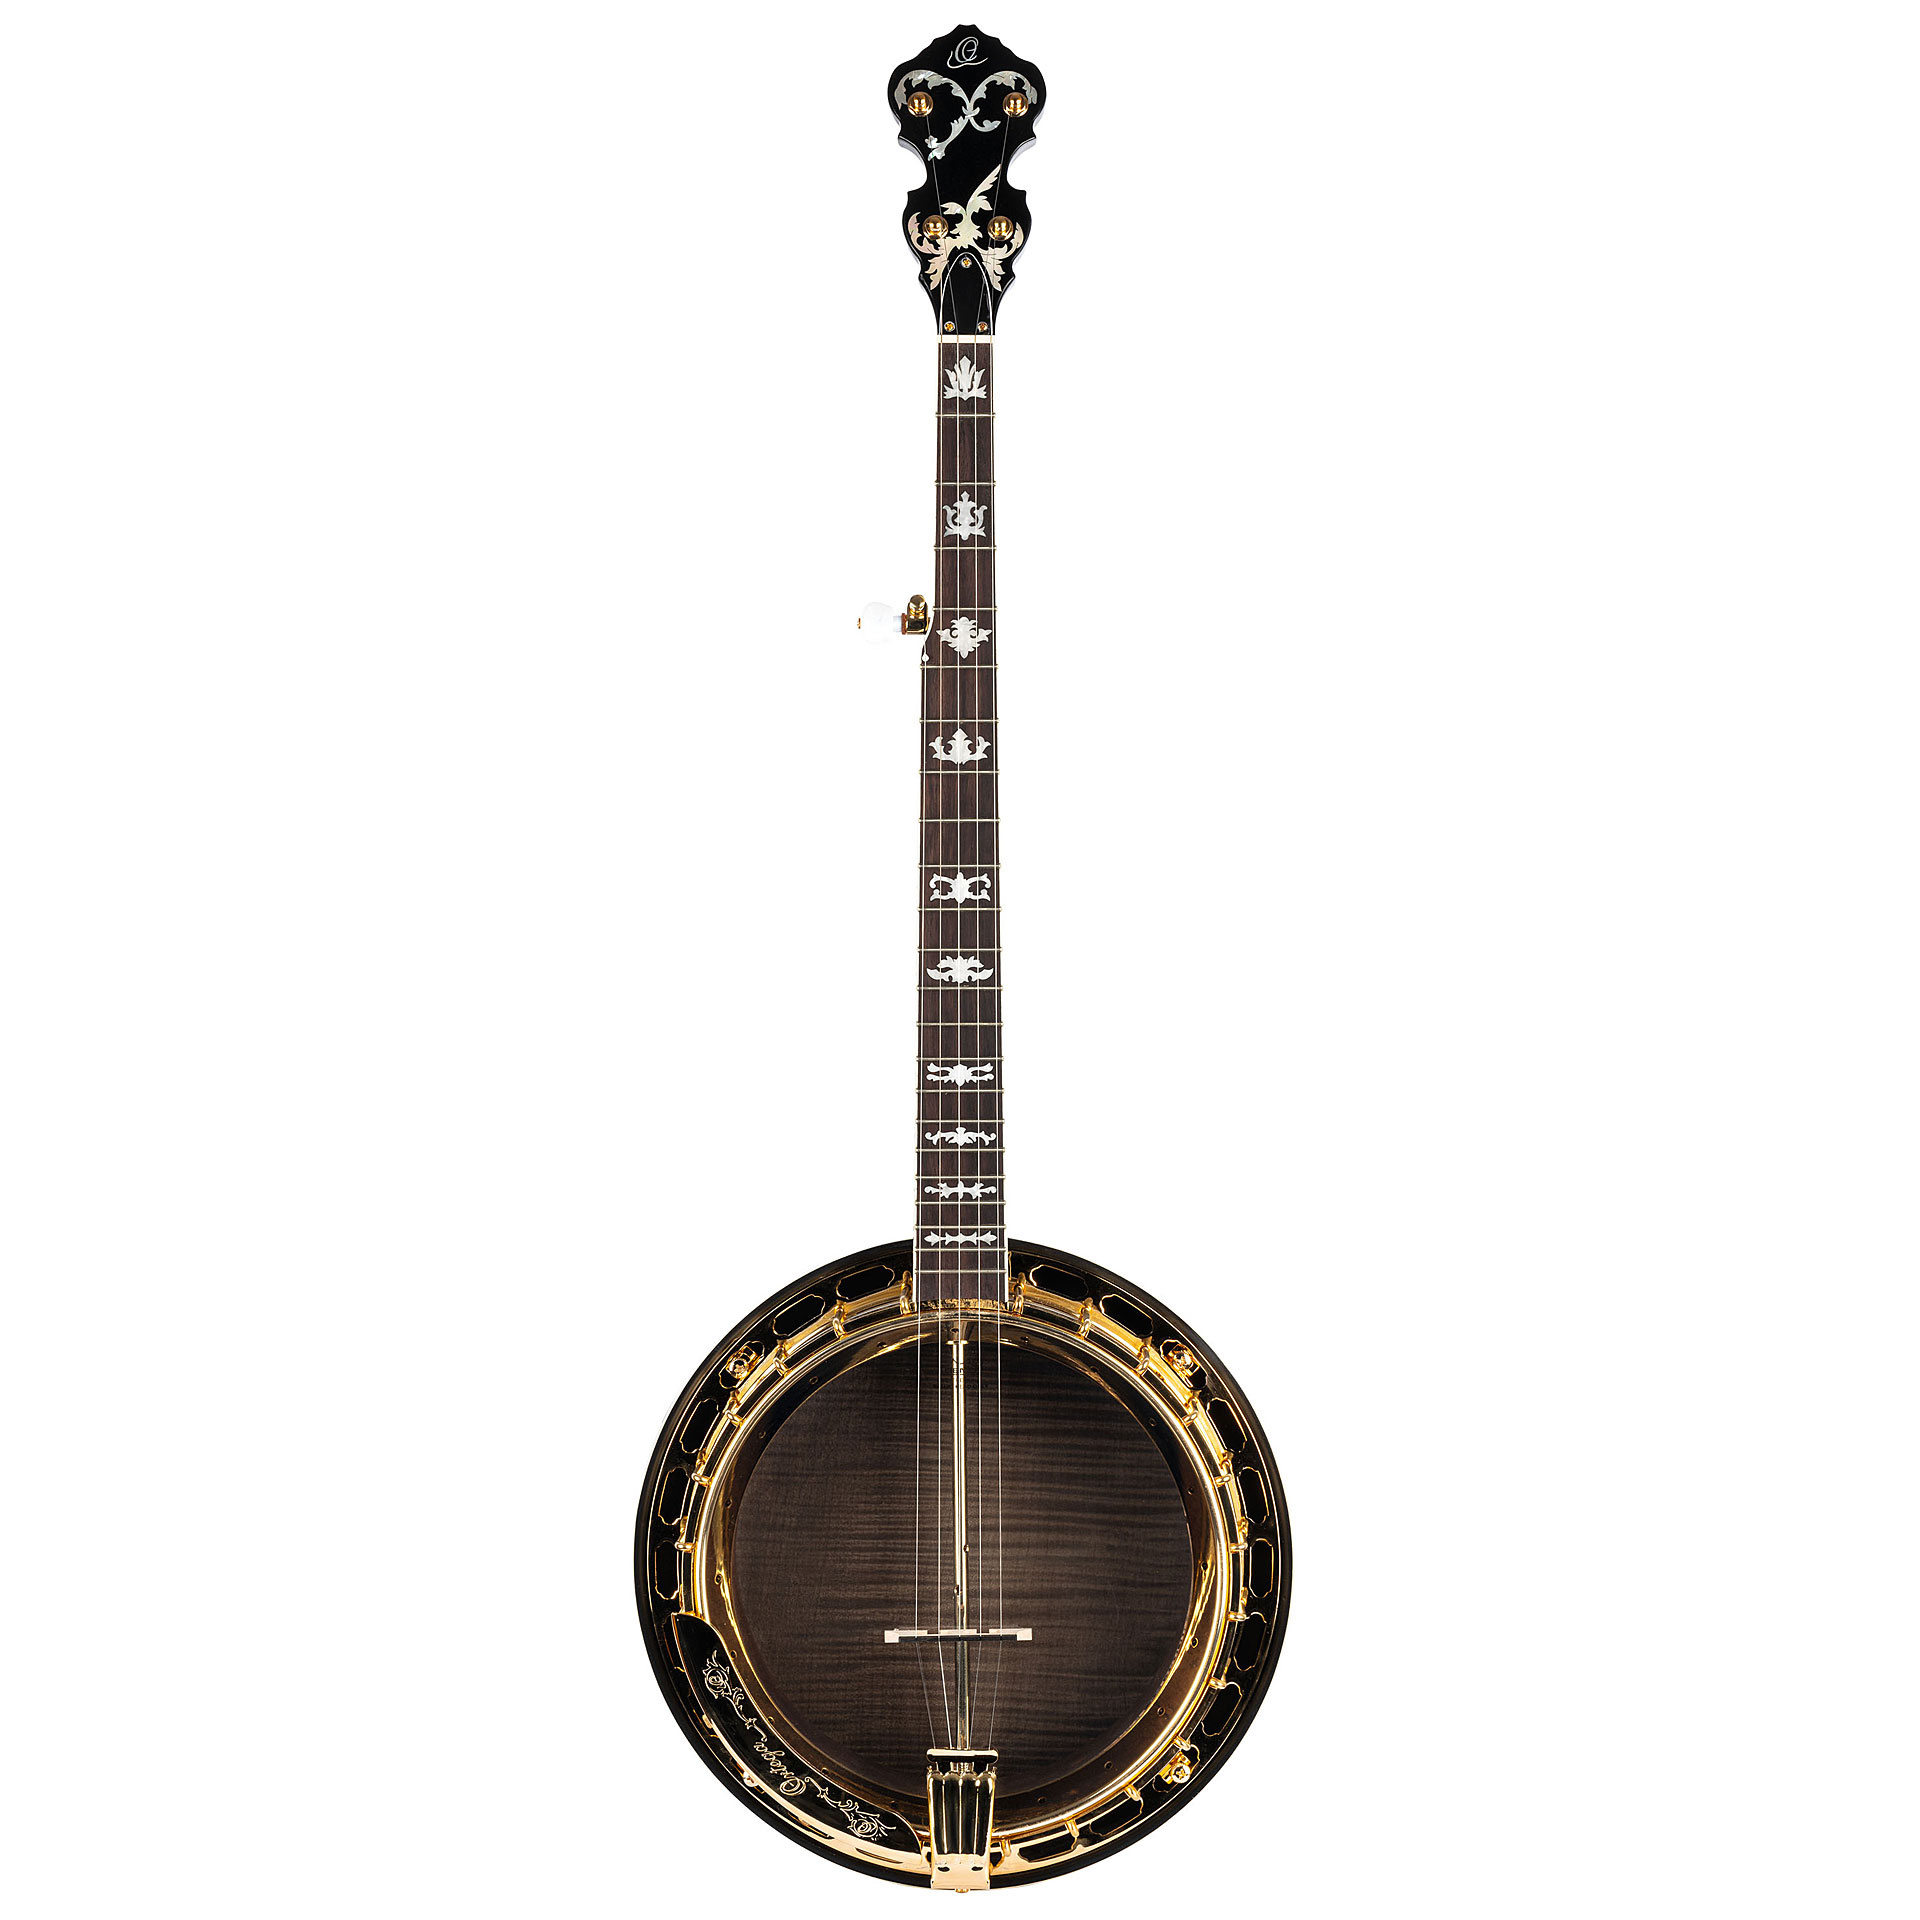 Banjo: Ortega OBJ850-MA, Bluegrass music, A stringed musical instrument with a thin membrane. 1920x1920 HD Background.